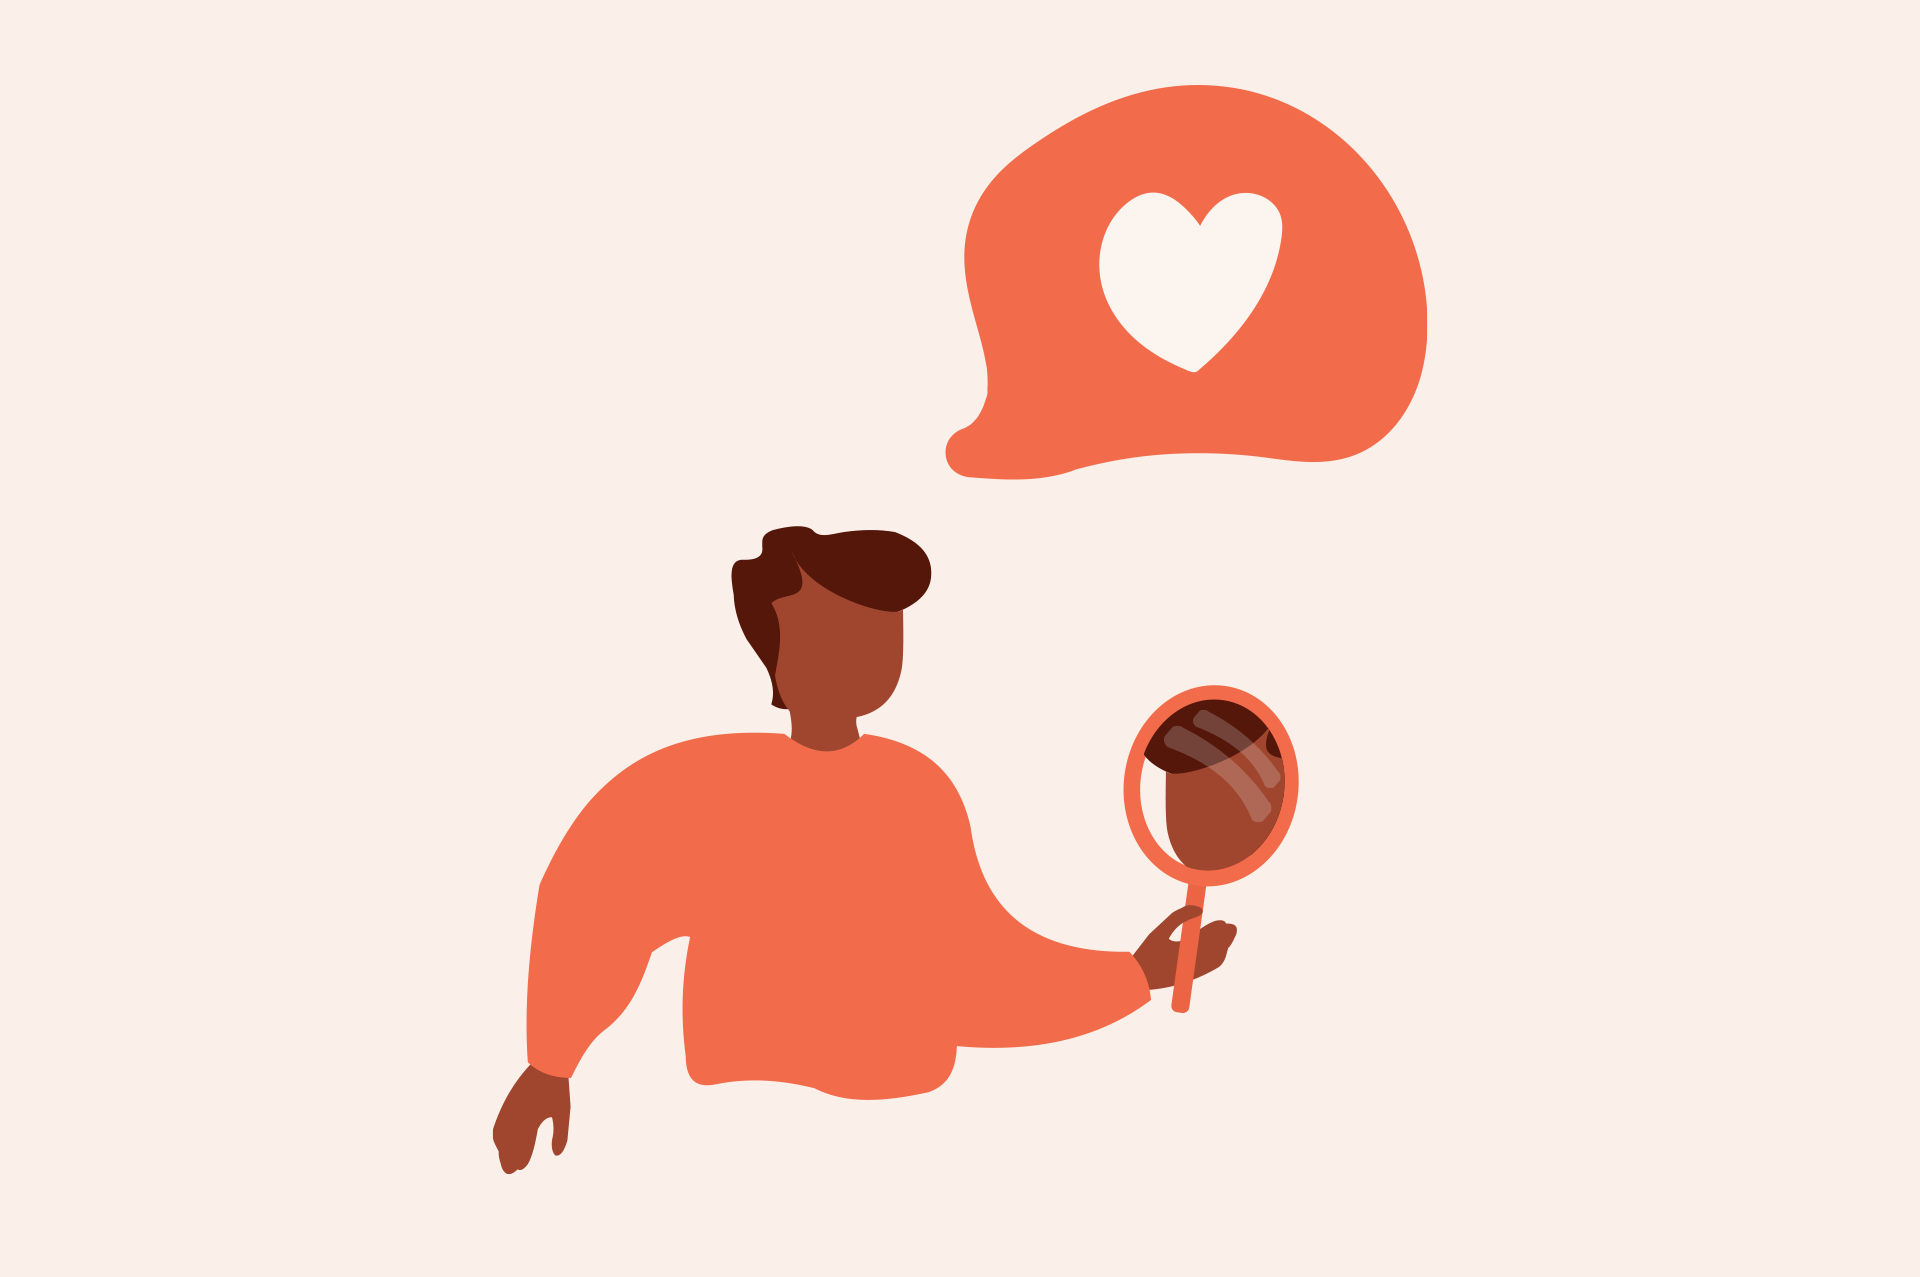 Illustration of a person holding a mirror in front of themselves, with a heart above their head